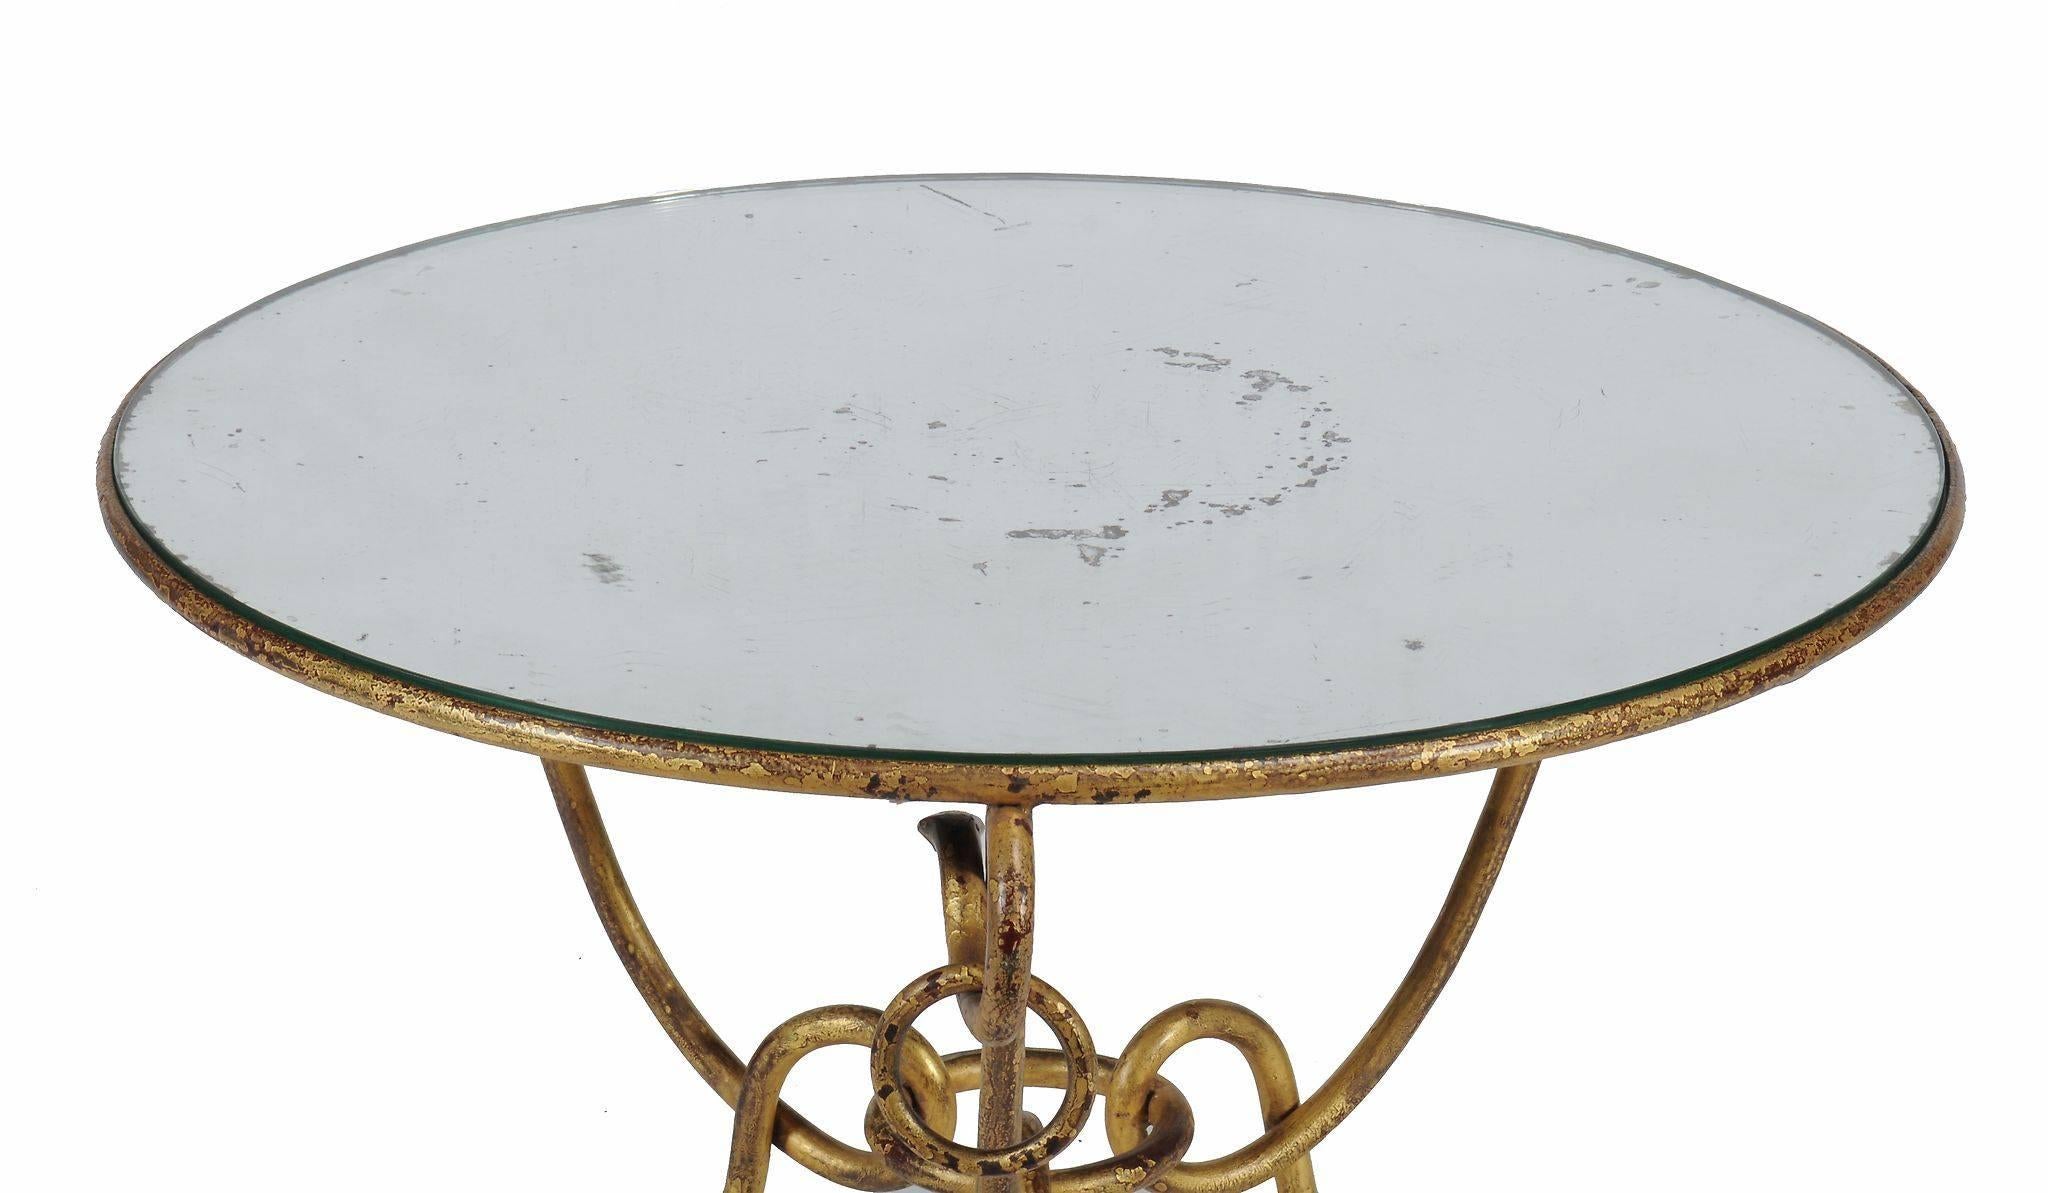 Magnificent Hollywood Regency style round gilt iron coffee or centre table with mirrored top by René Drouet (1899-1993), circular mirrored top with aged mirror spots over gilt iron base on three legs and links, dating to circa